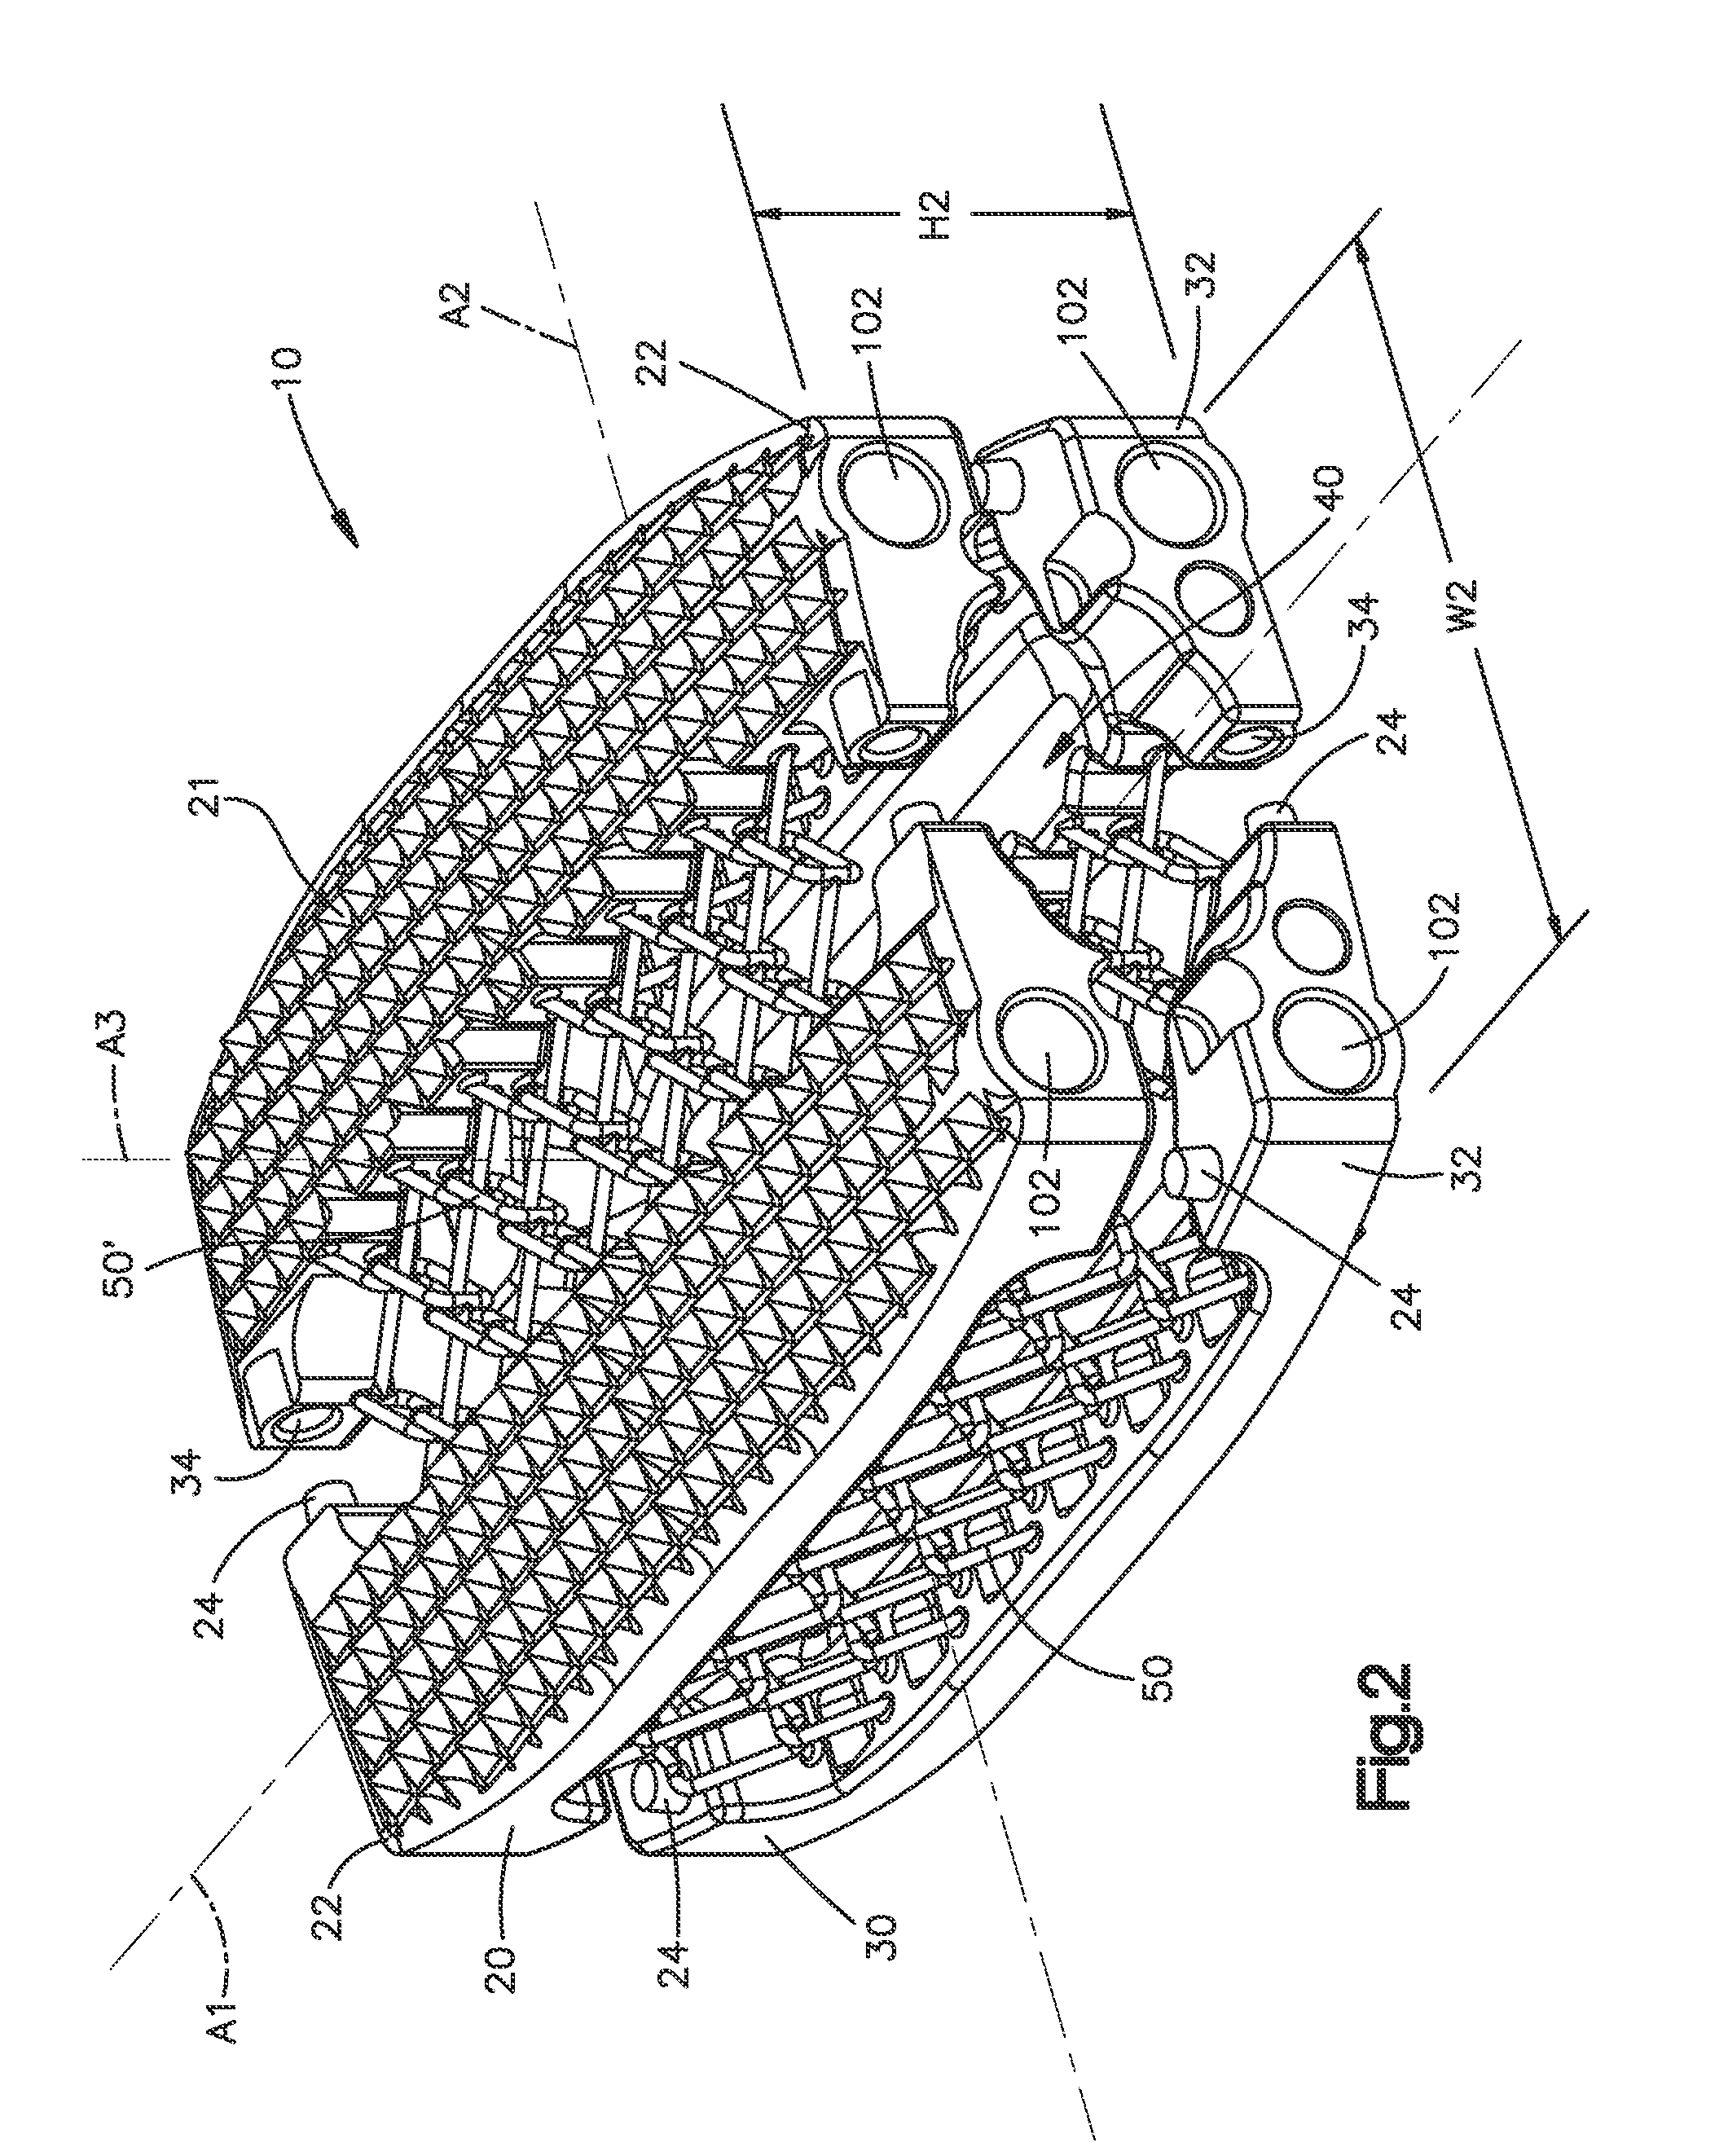 Expandable intervertebral implant and associated method of manufacturing the same